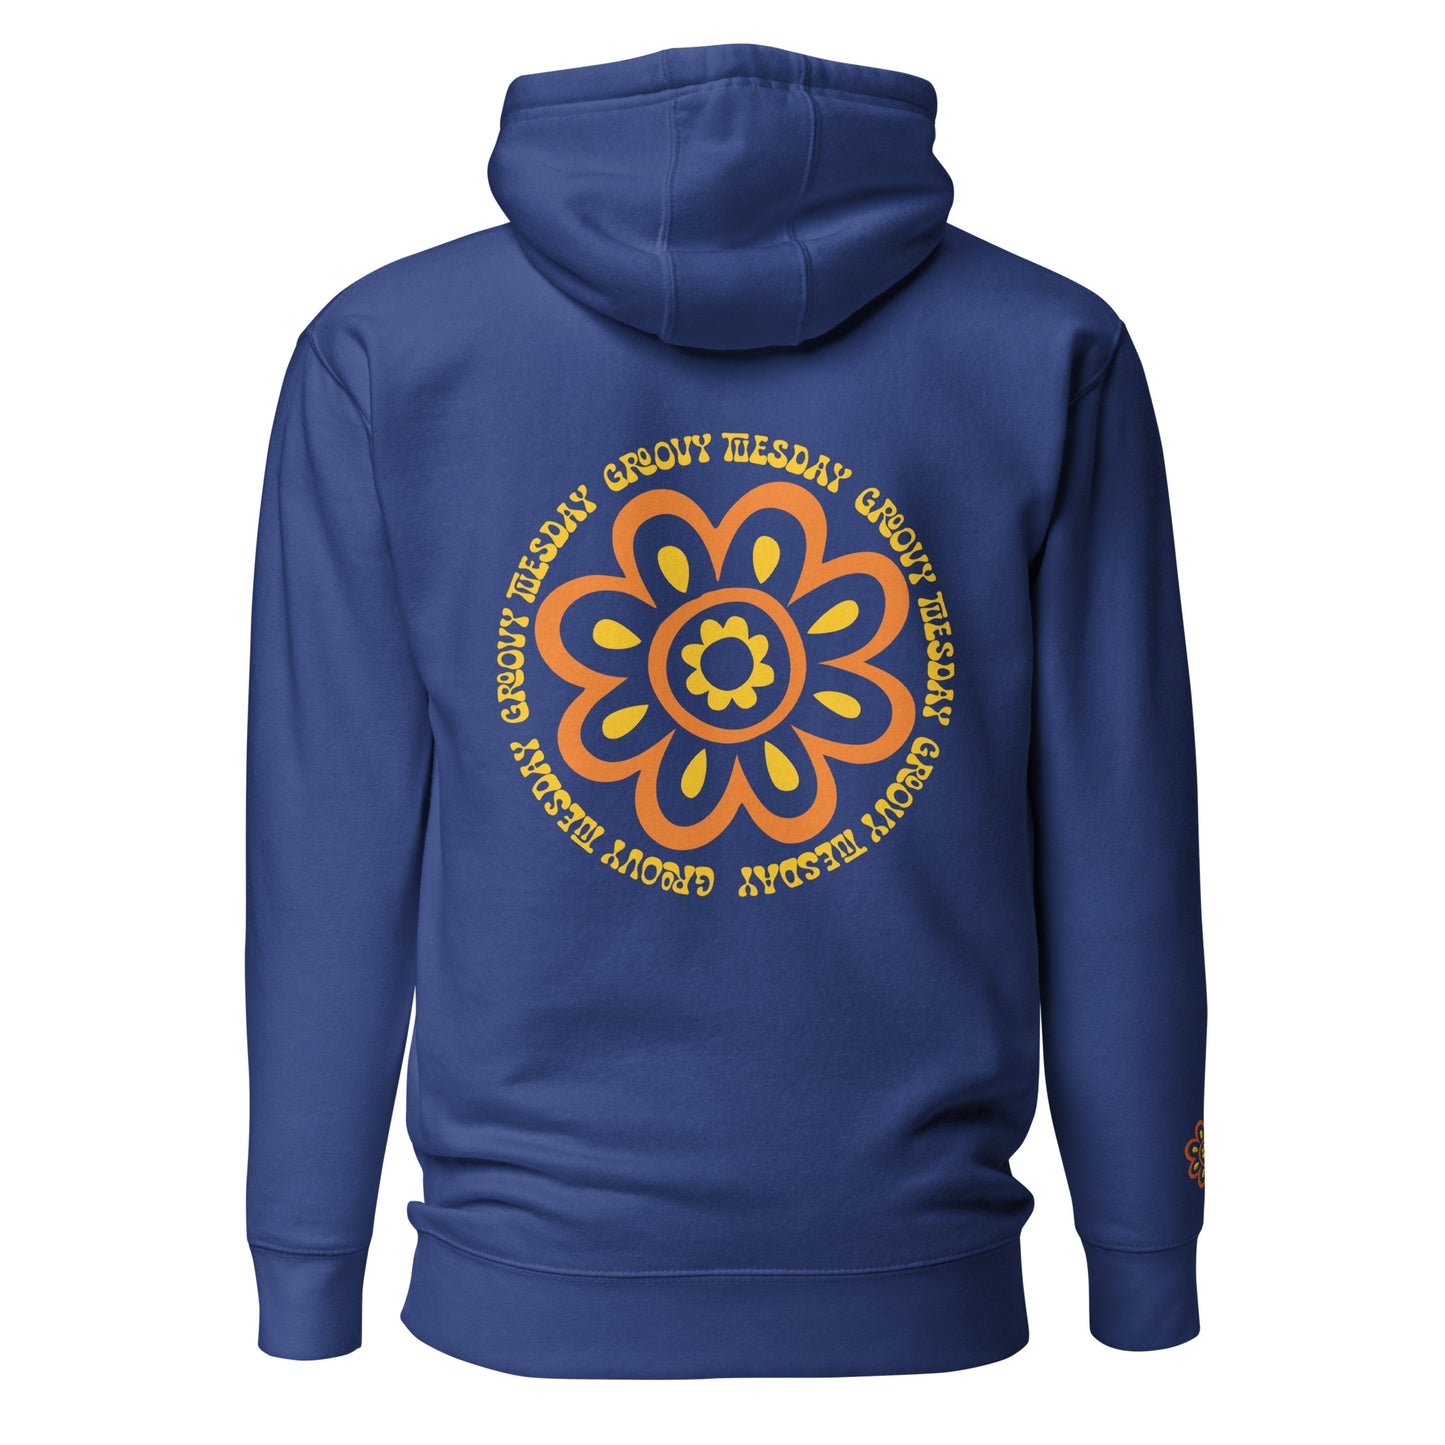 Groovy Tuesday Unisex Embroidered Hoodie (Blue/Yellow)